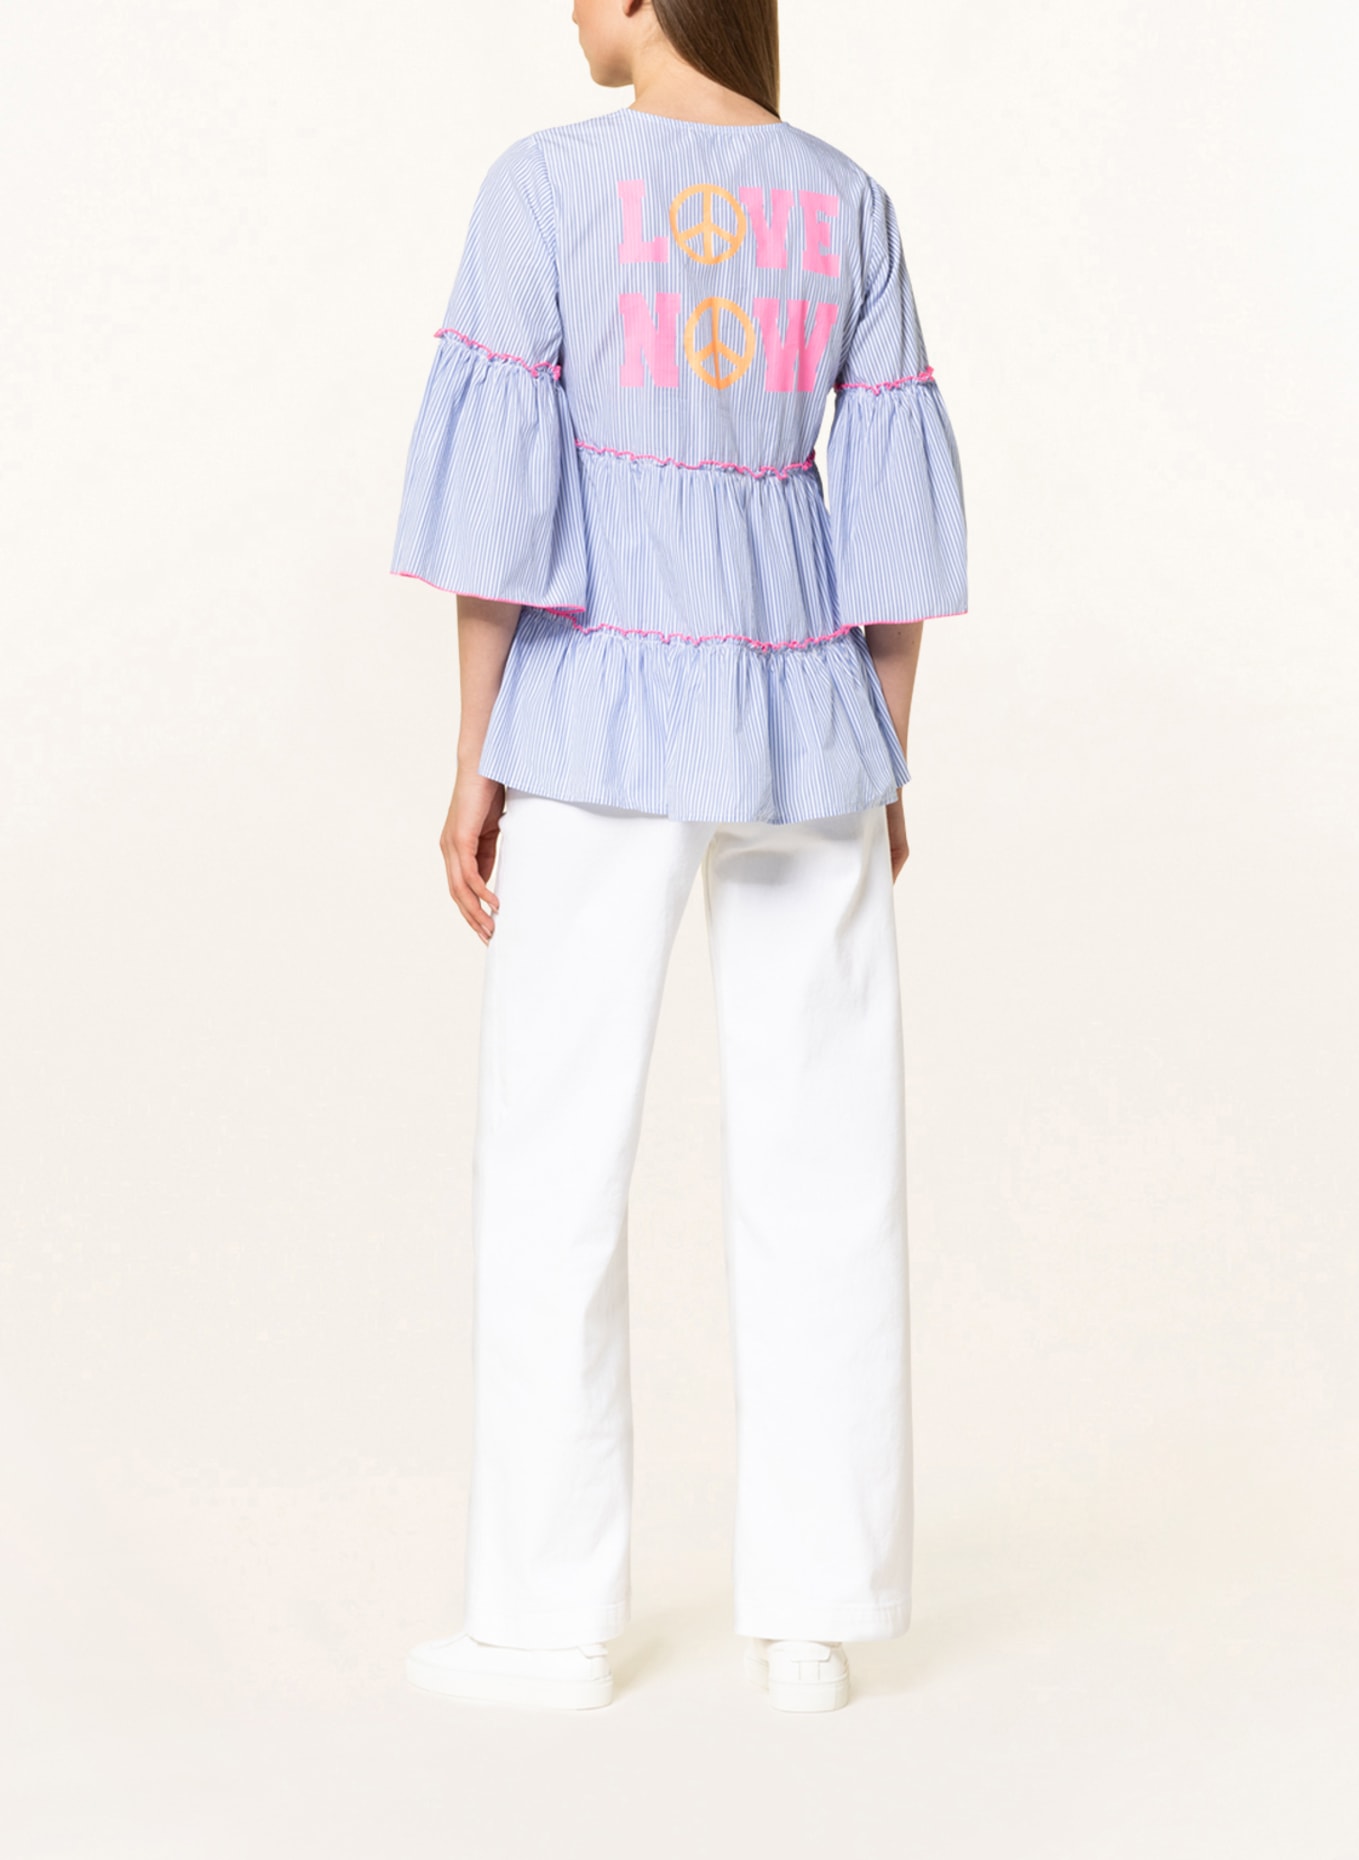 RISY & JERFS Shirt blouse MACAU With 3/4 sleeves , Color: WHITE/ LIGHT BLUE/ NEON PINK (Image 3)